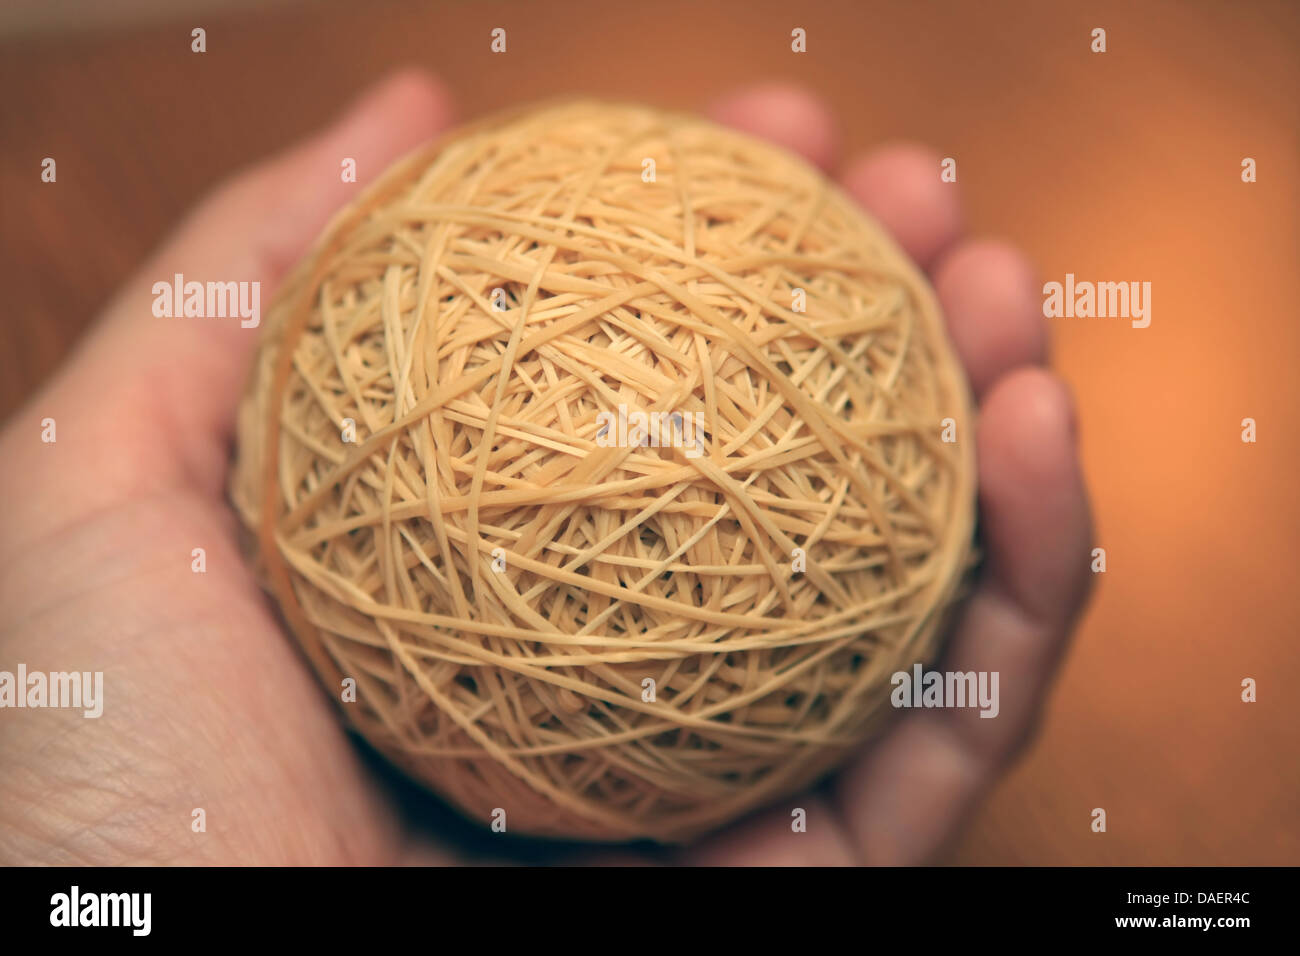 rubber band ball held in left hand Stock Photo